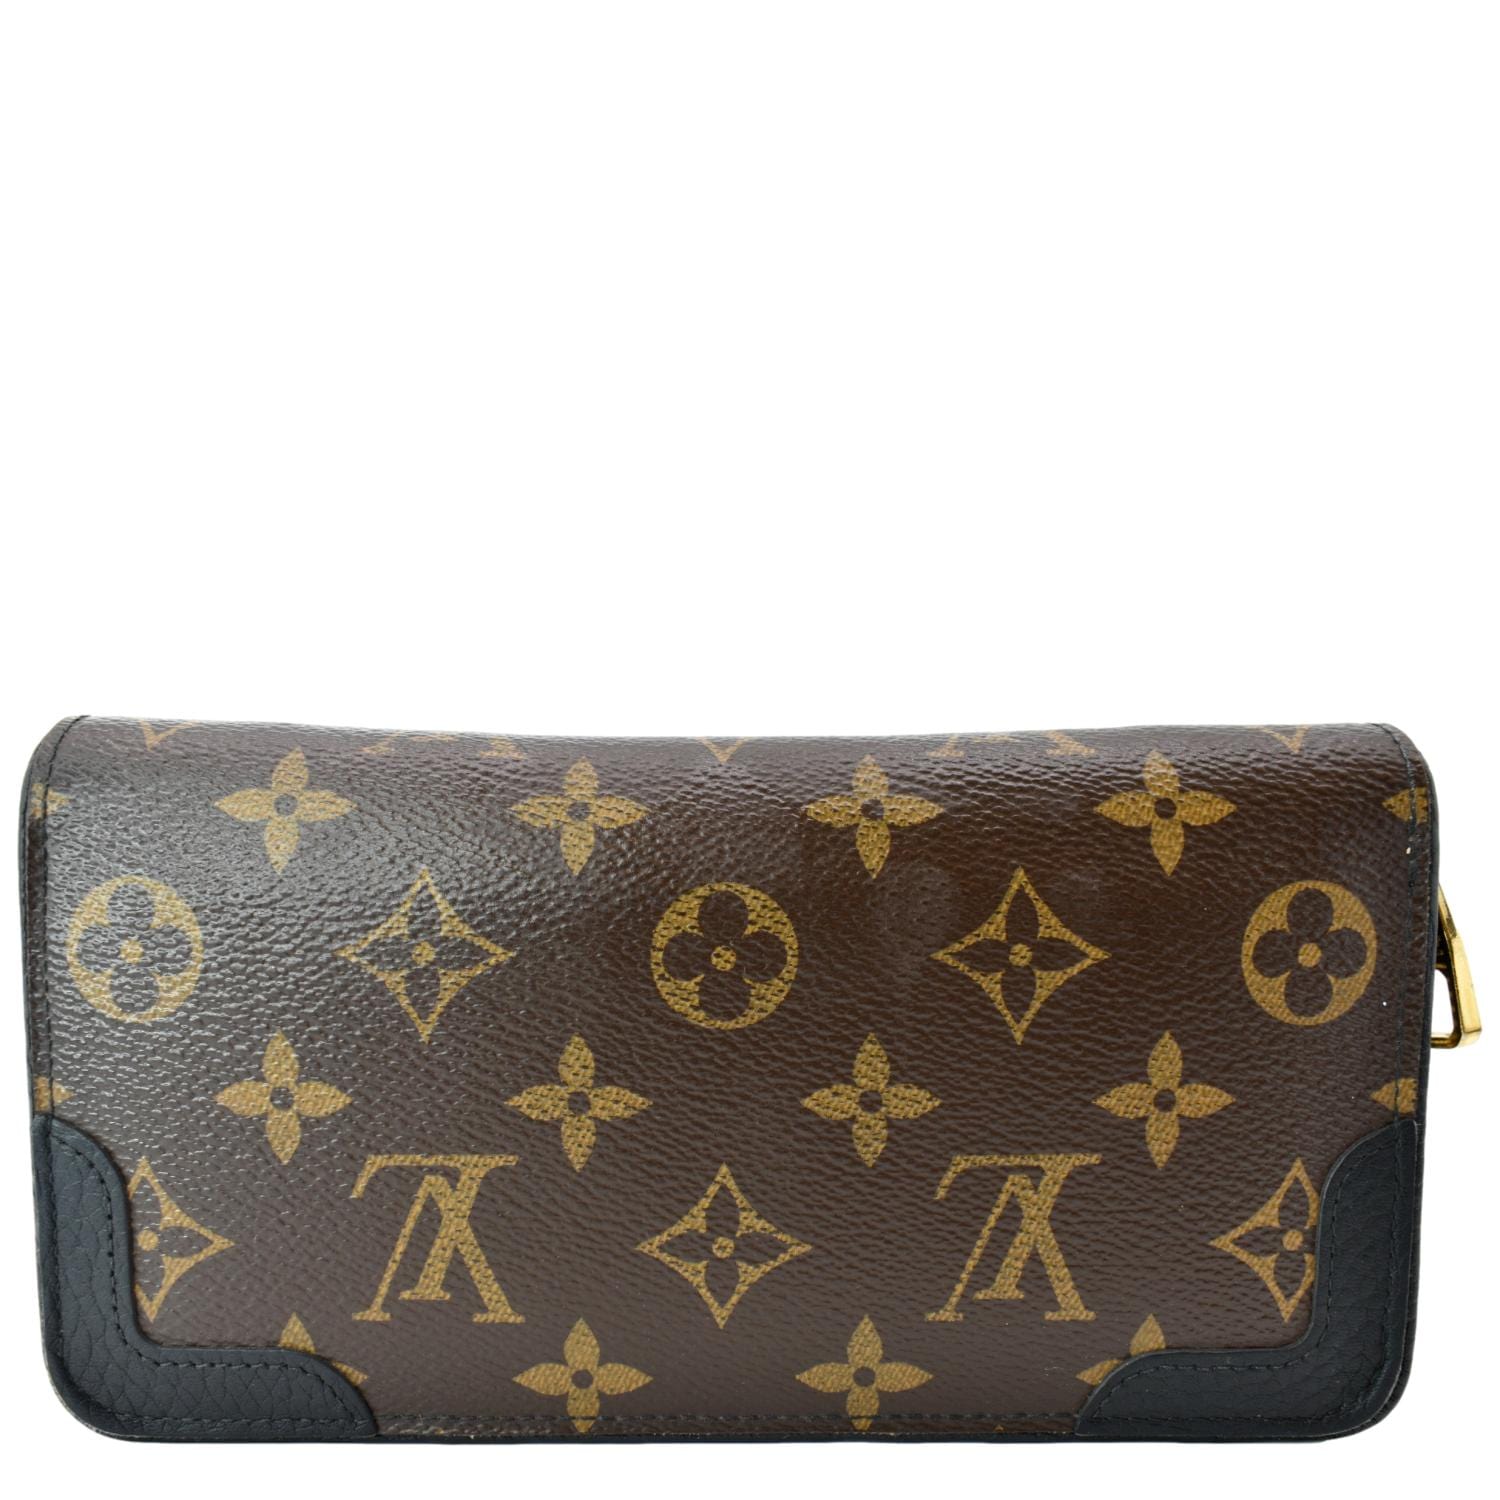 Need a wallet larger than Zippy? Watch this. Louis Vuitton Daily